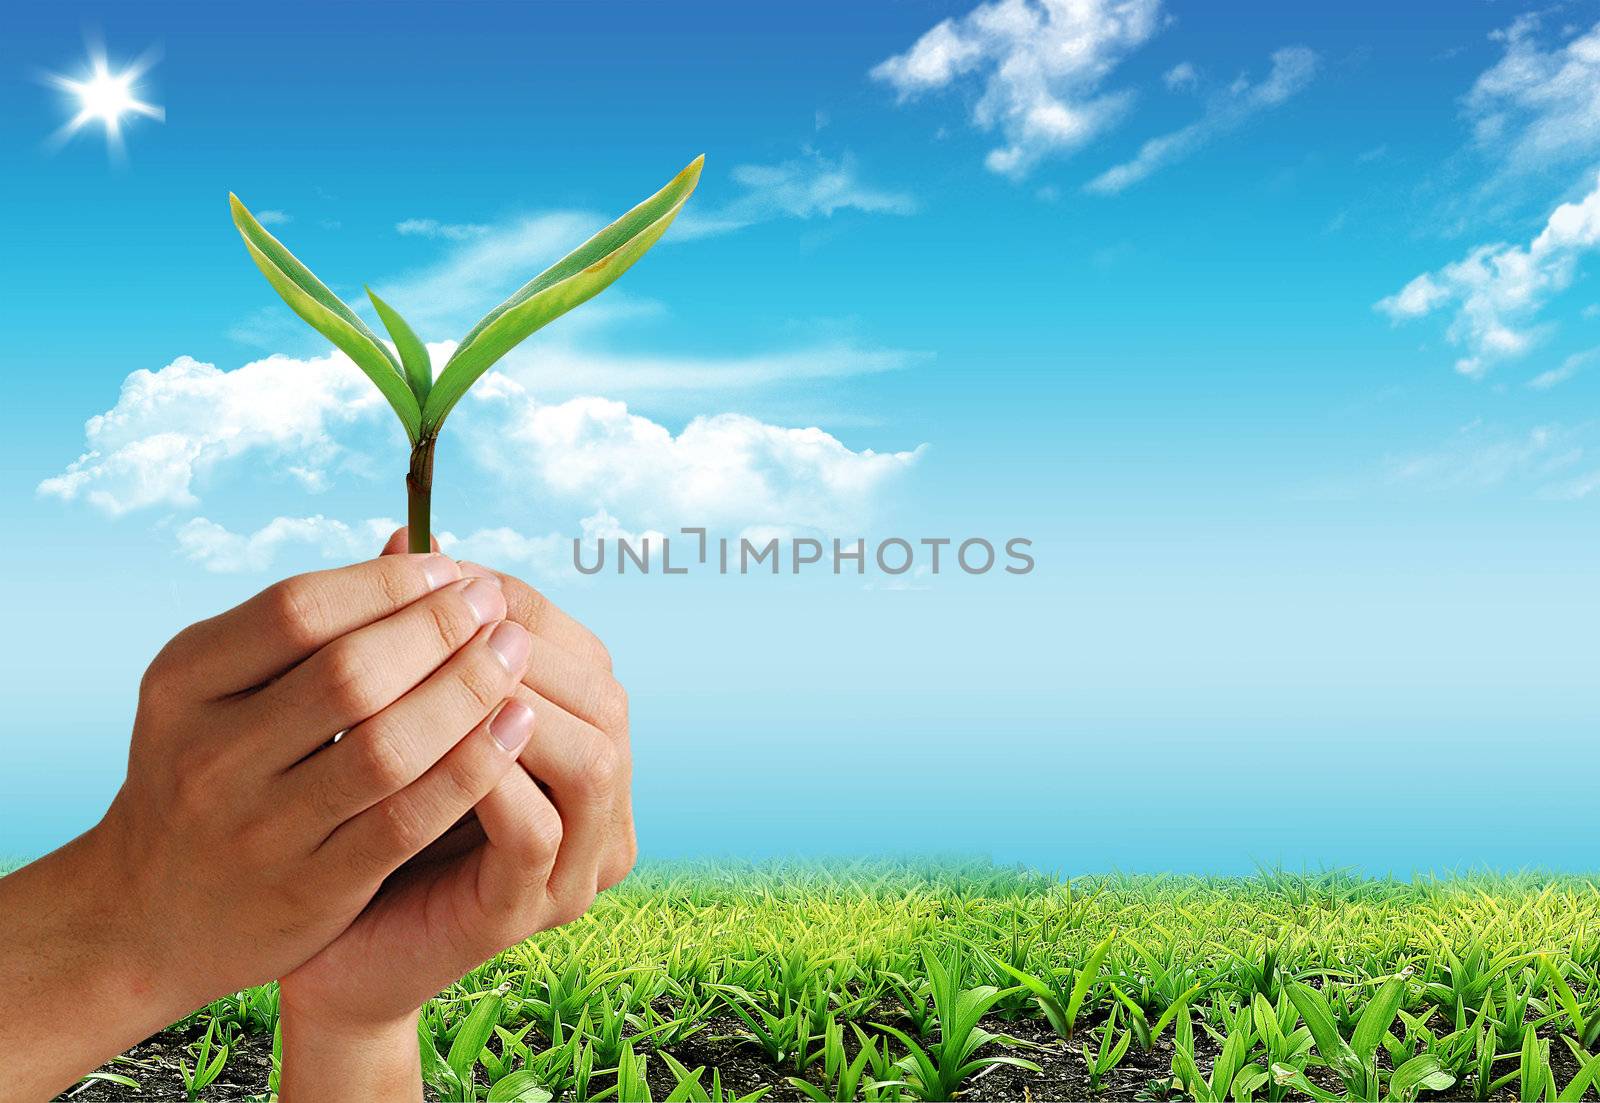 Nice summer picture with green plant on the hand